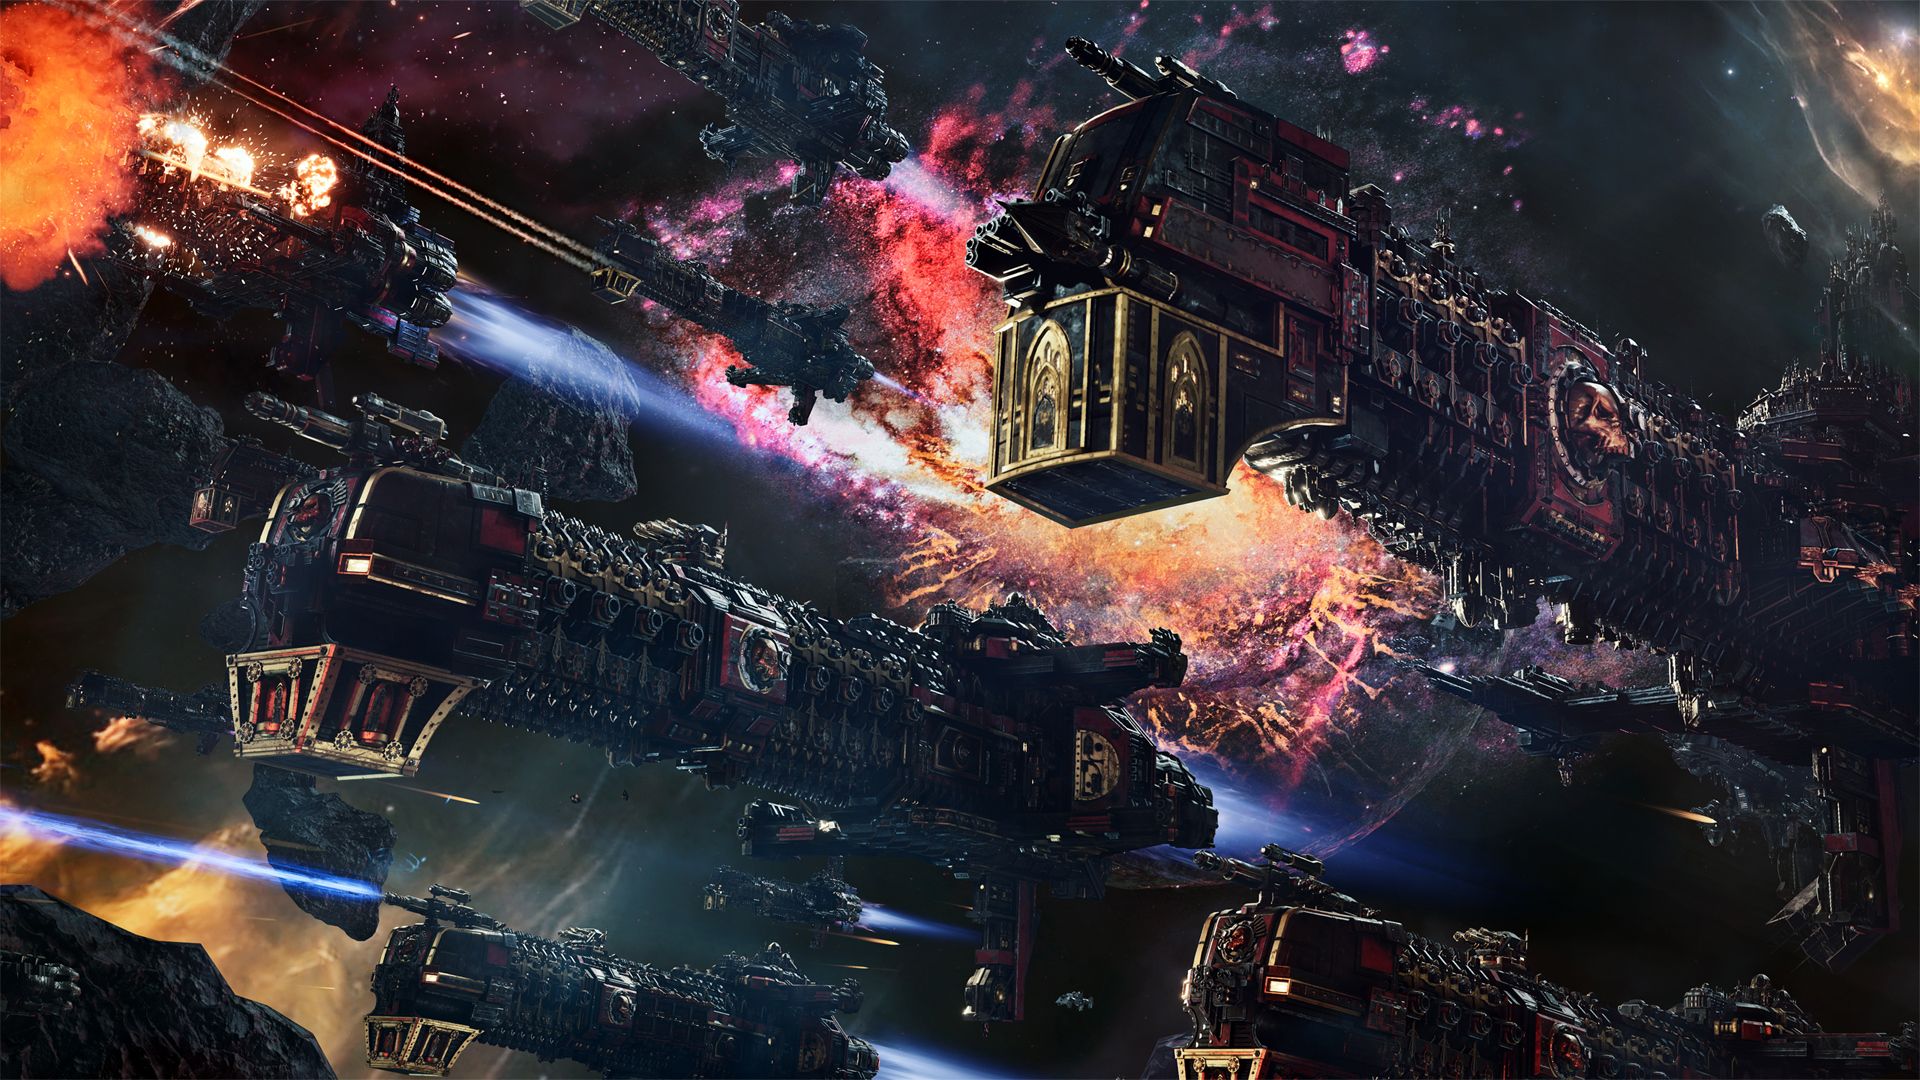 Epic Space Battle Wallpapers